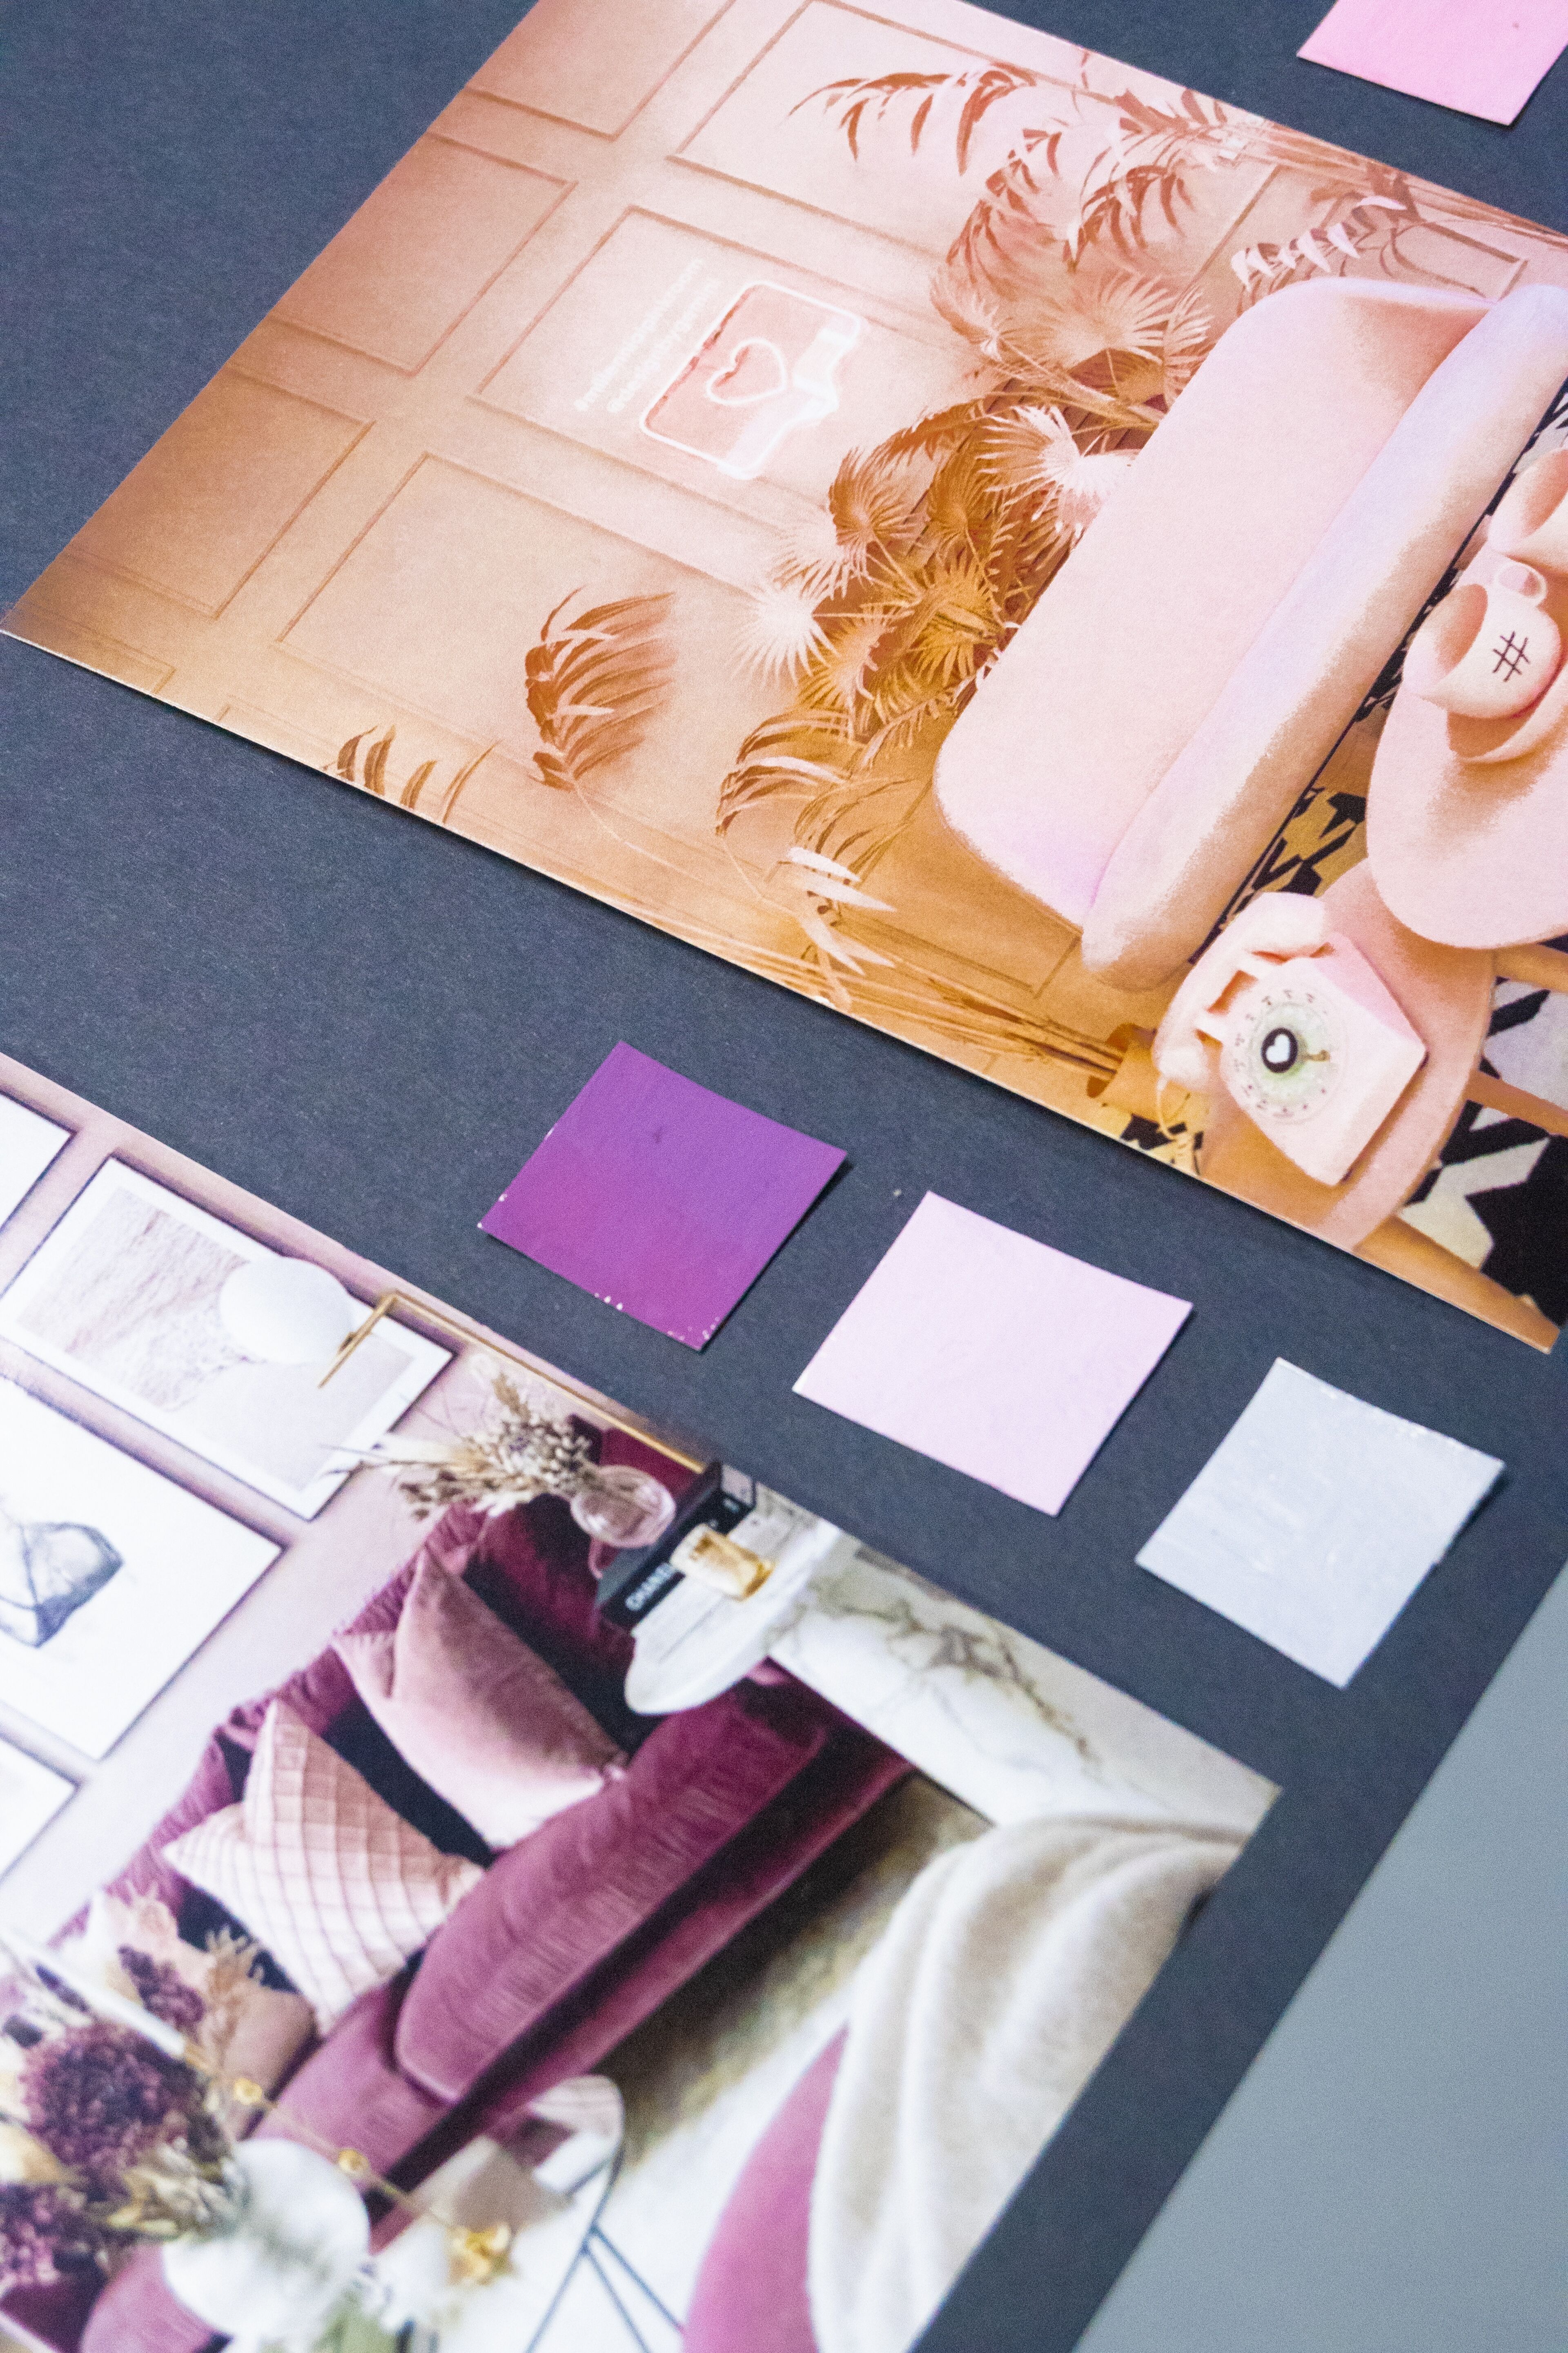 A mood board showcasing various interior design elements with a pink couch, tropical leaves, and color swatches on a dark background.